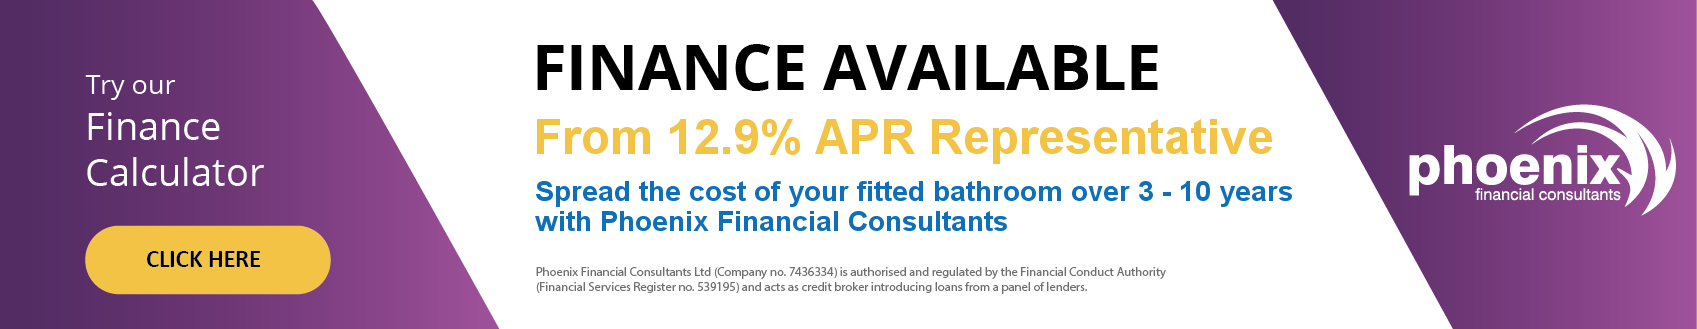 Fitted bathroom finance available